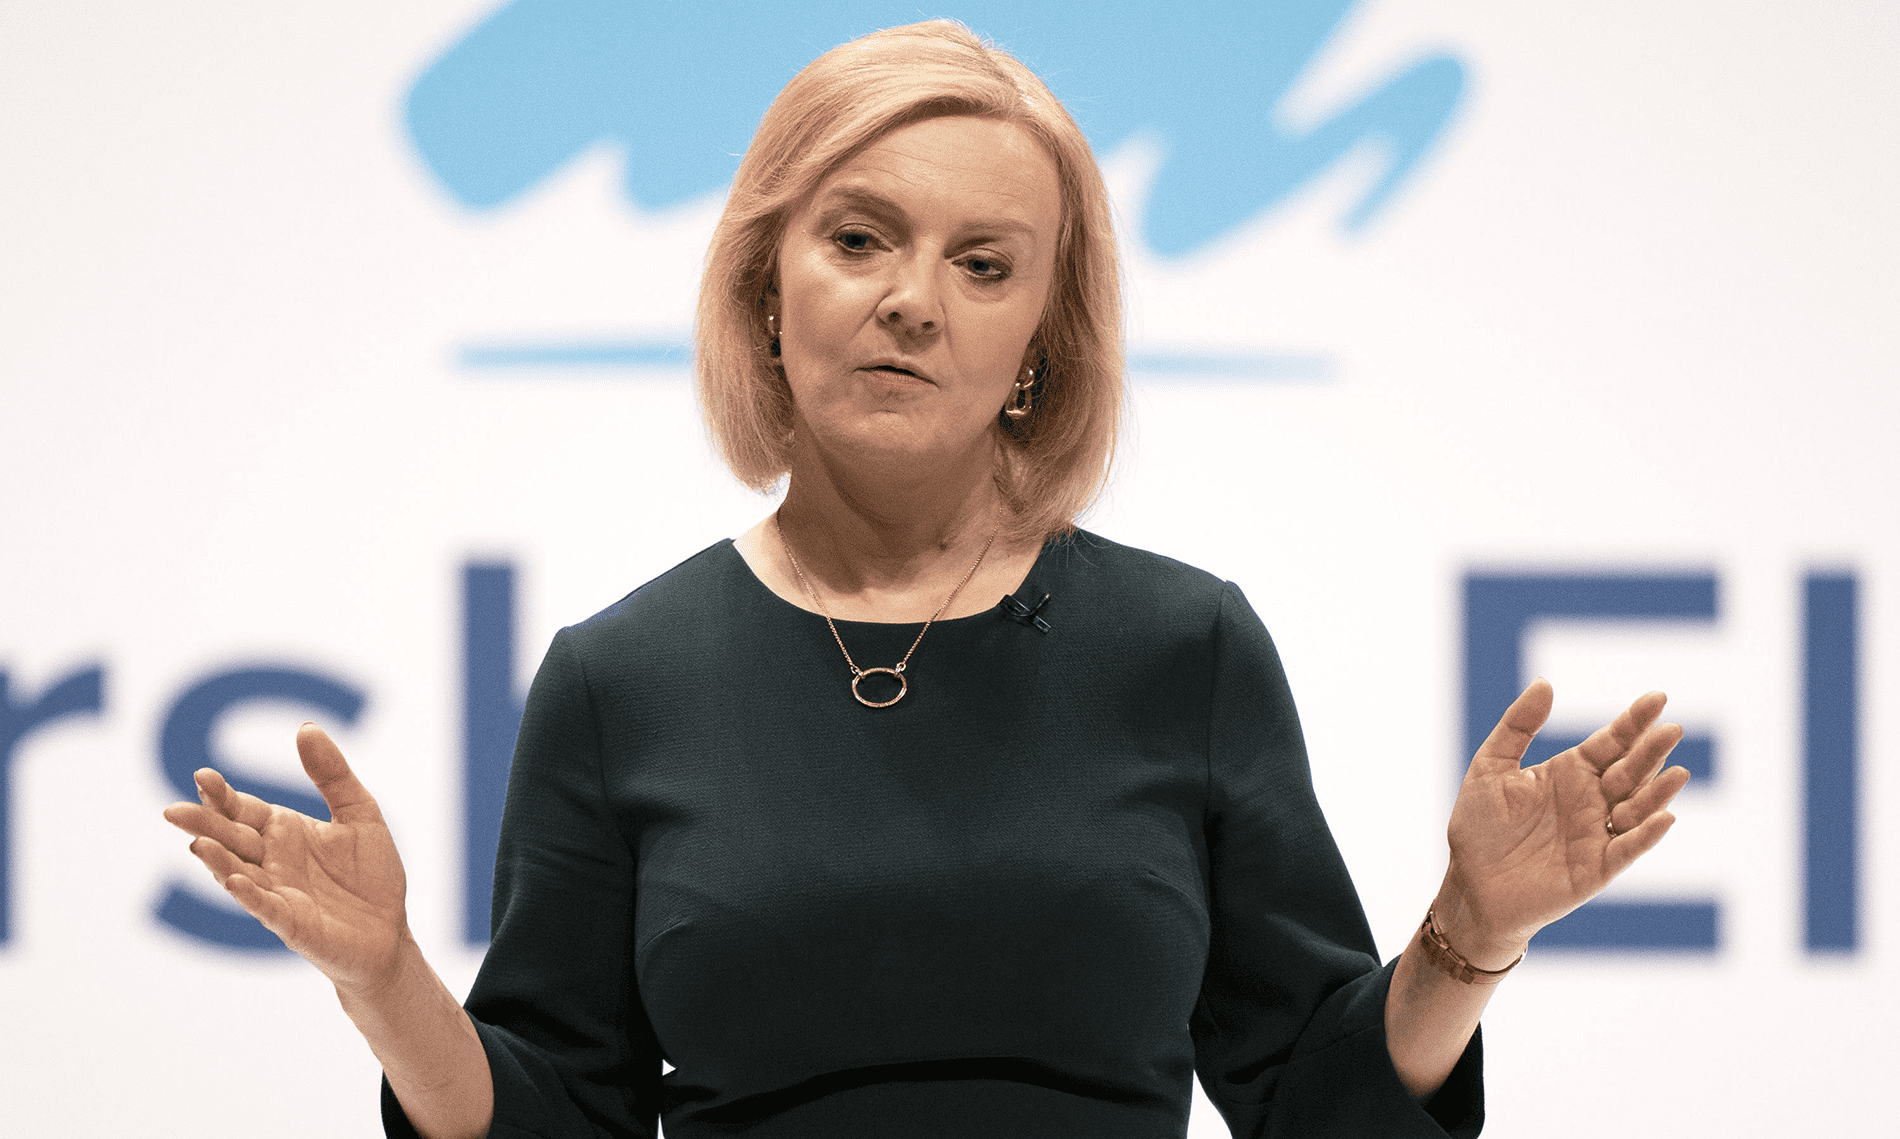 Liz Truss refuses to rule out standing for Tory leadership in future